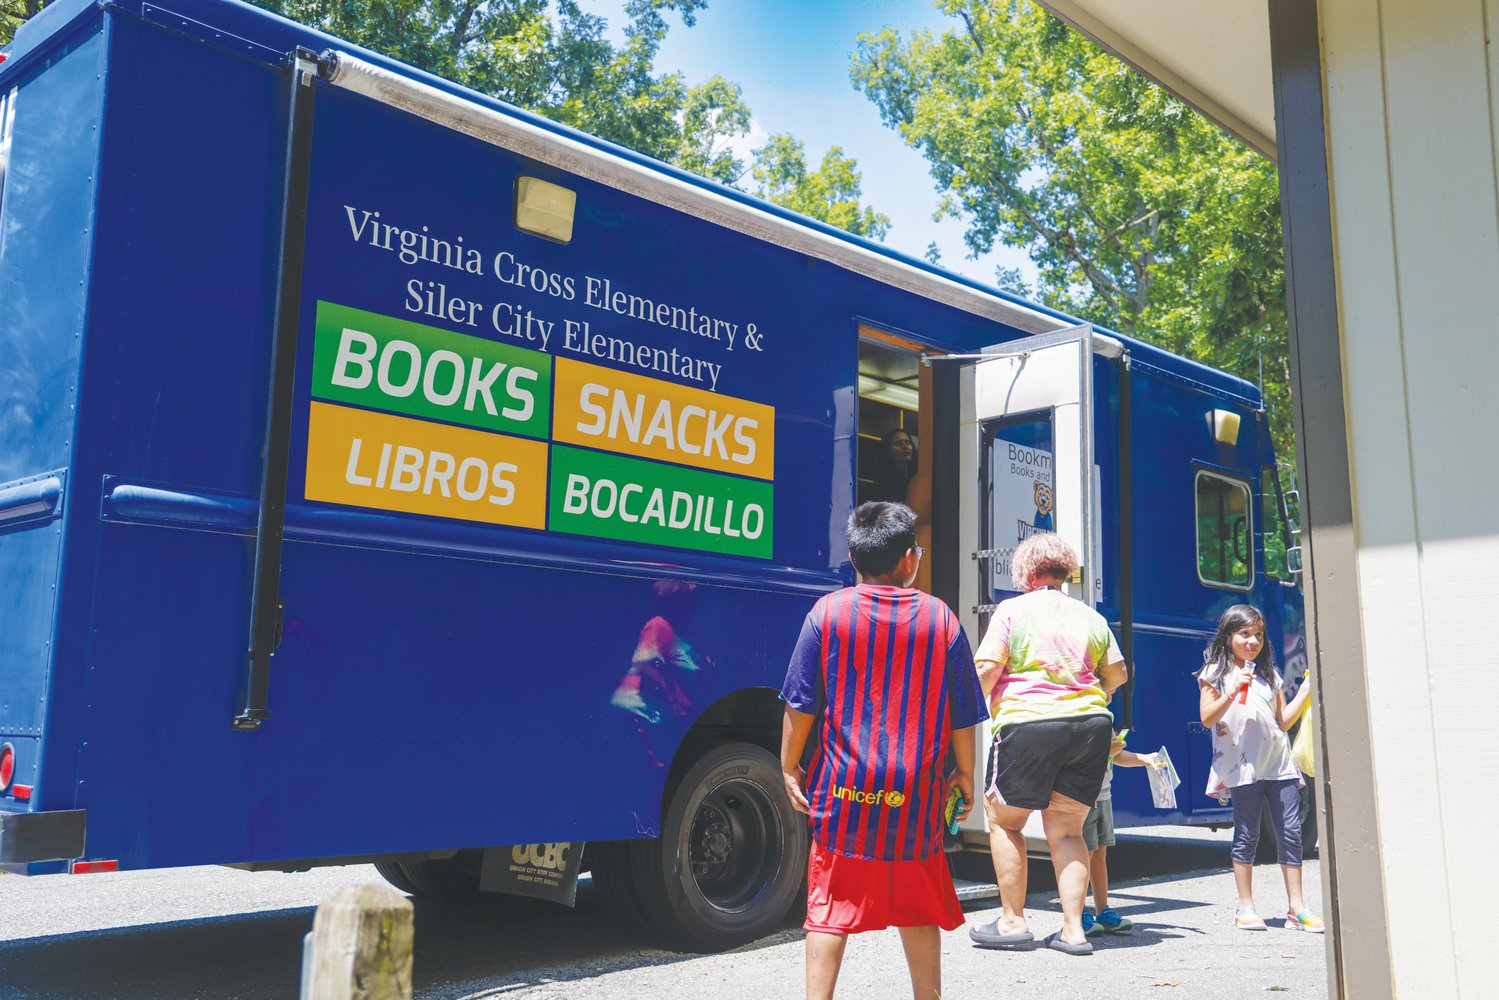 The Virginia Cross Elementary Bookmobile visited community centers and neighborhoods around Siler City throughout the summer.